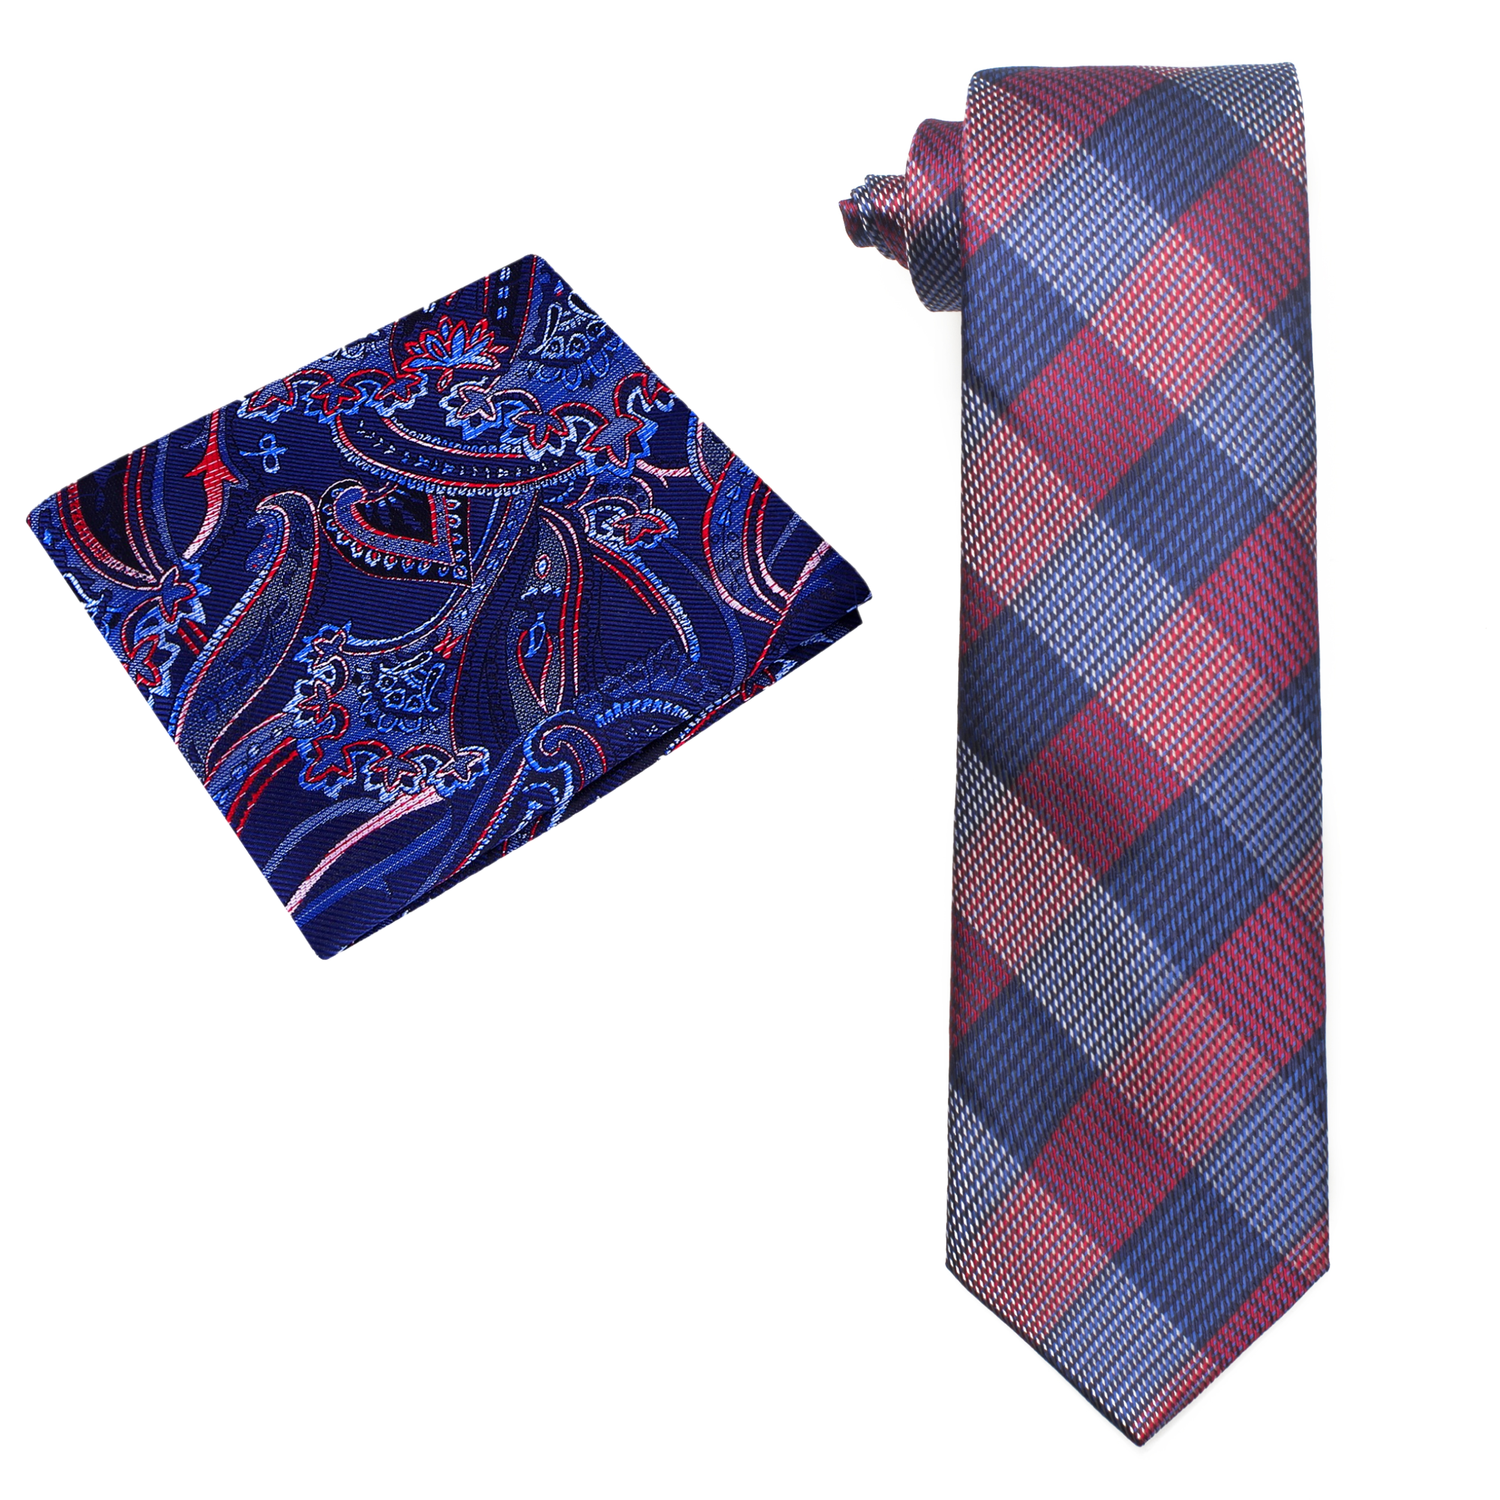 Alt View: Red and Blue Plaid Tie and Blue and Red Paisley Pocket Square